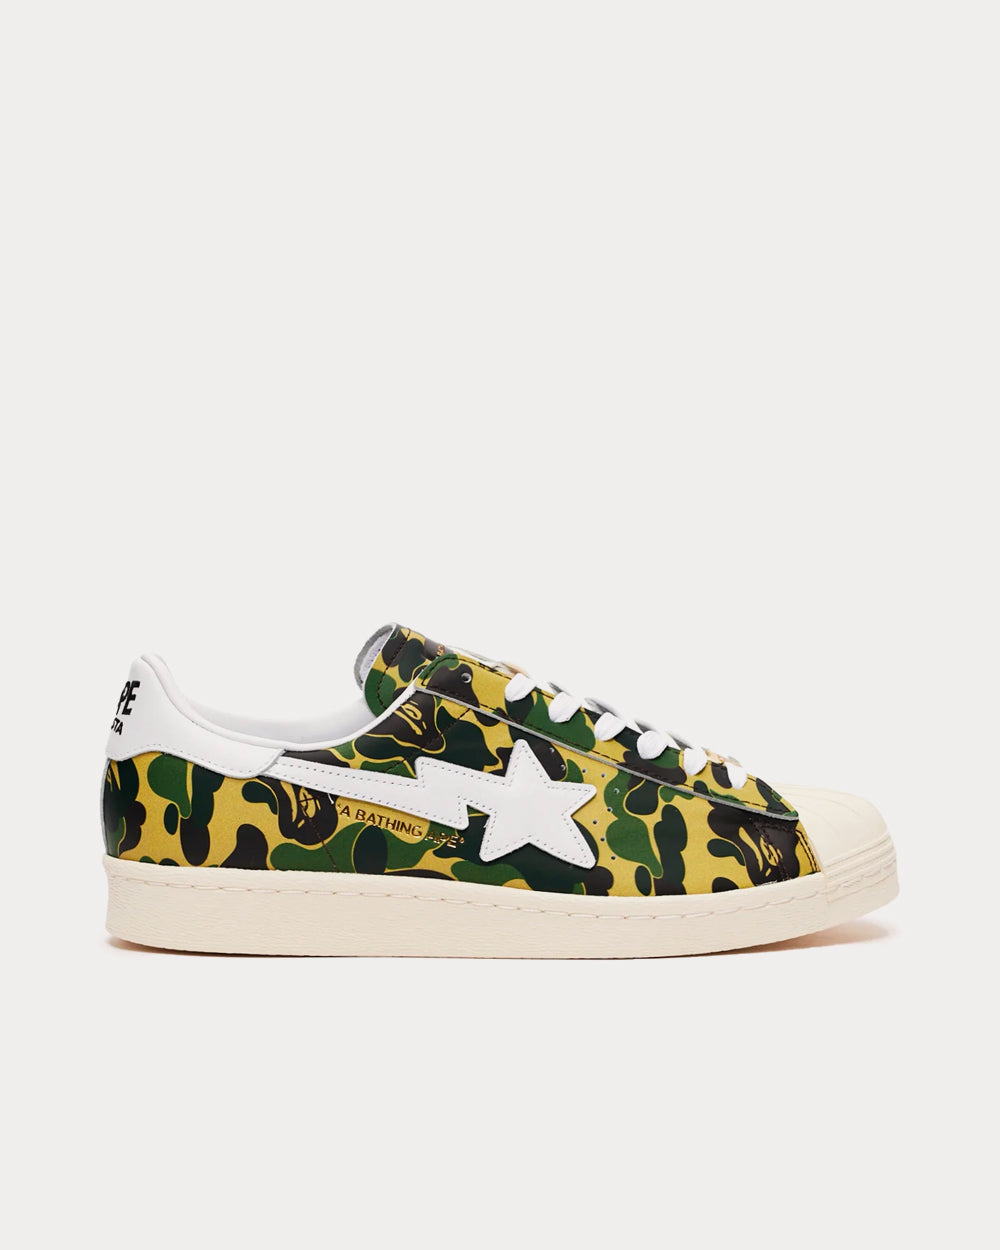 Adidas x BAPE Superstar 80s Off White / Ftwwht / Goldmt Low Top Sneakers -  Sneak in Peace